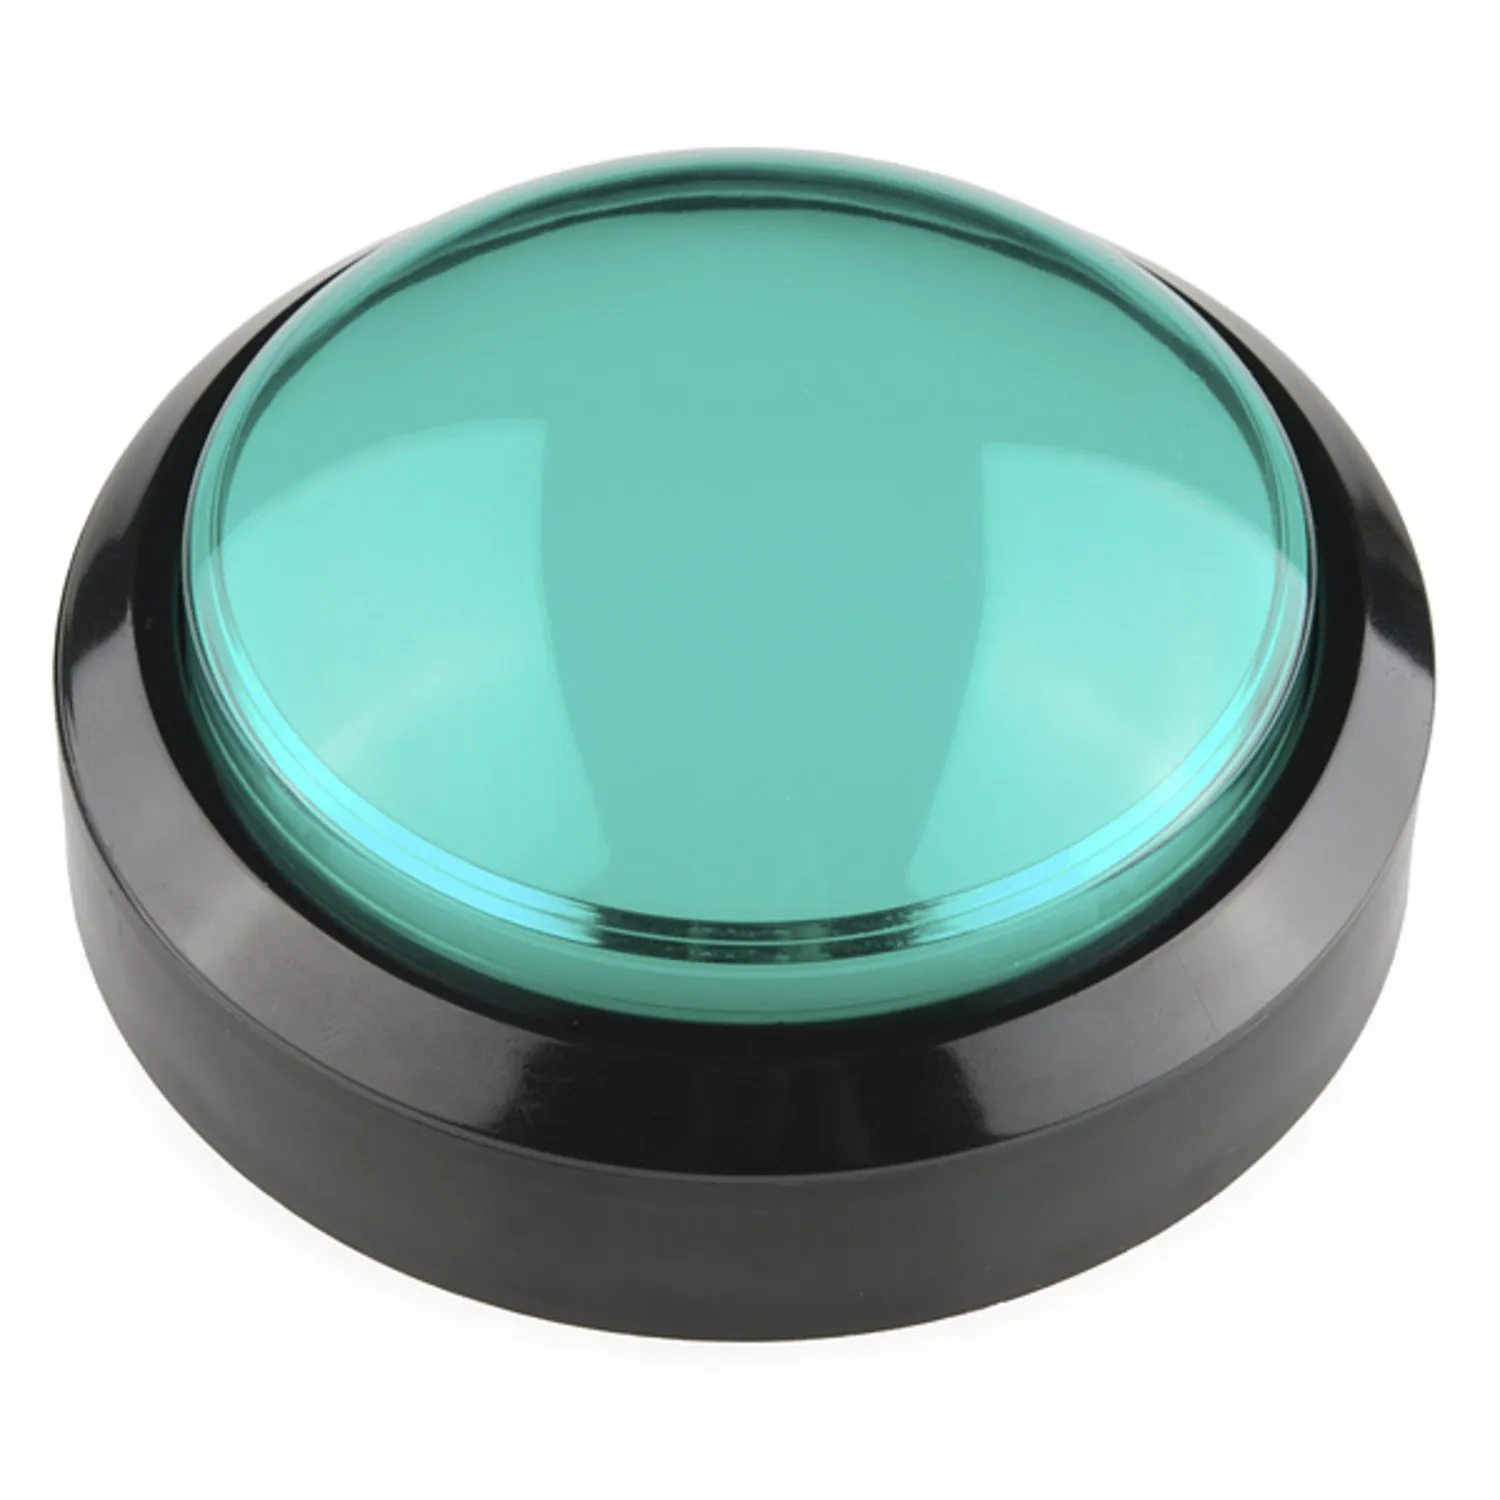 Photo of Big Dome Pushbutton - Green